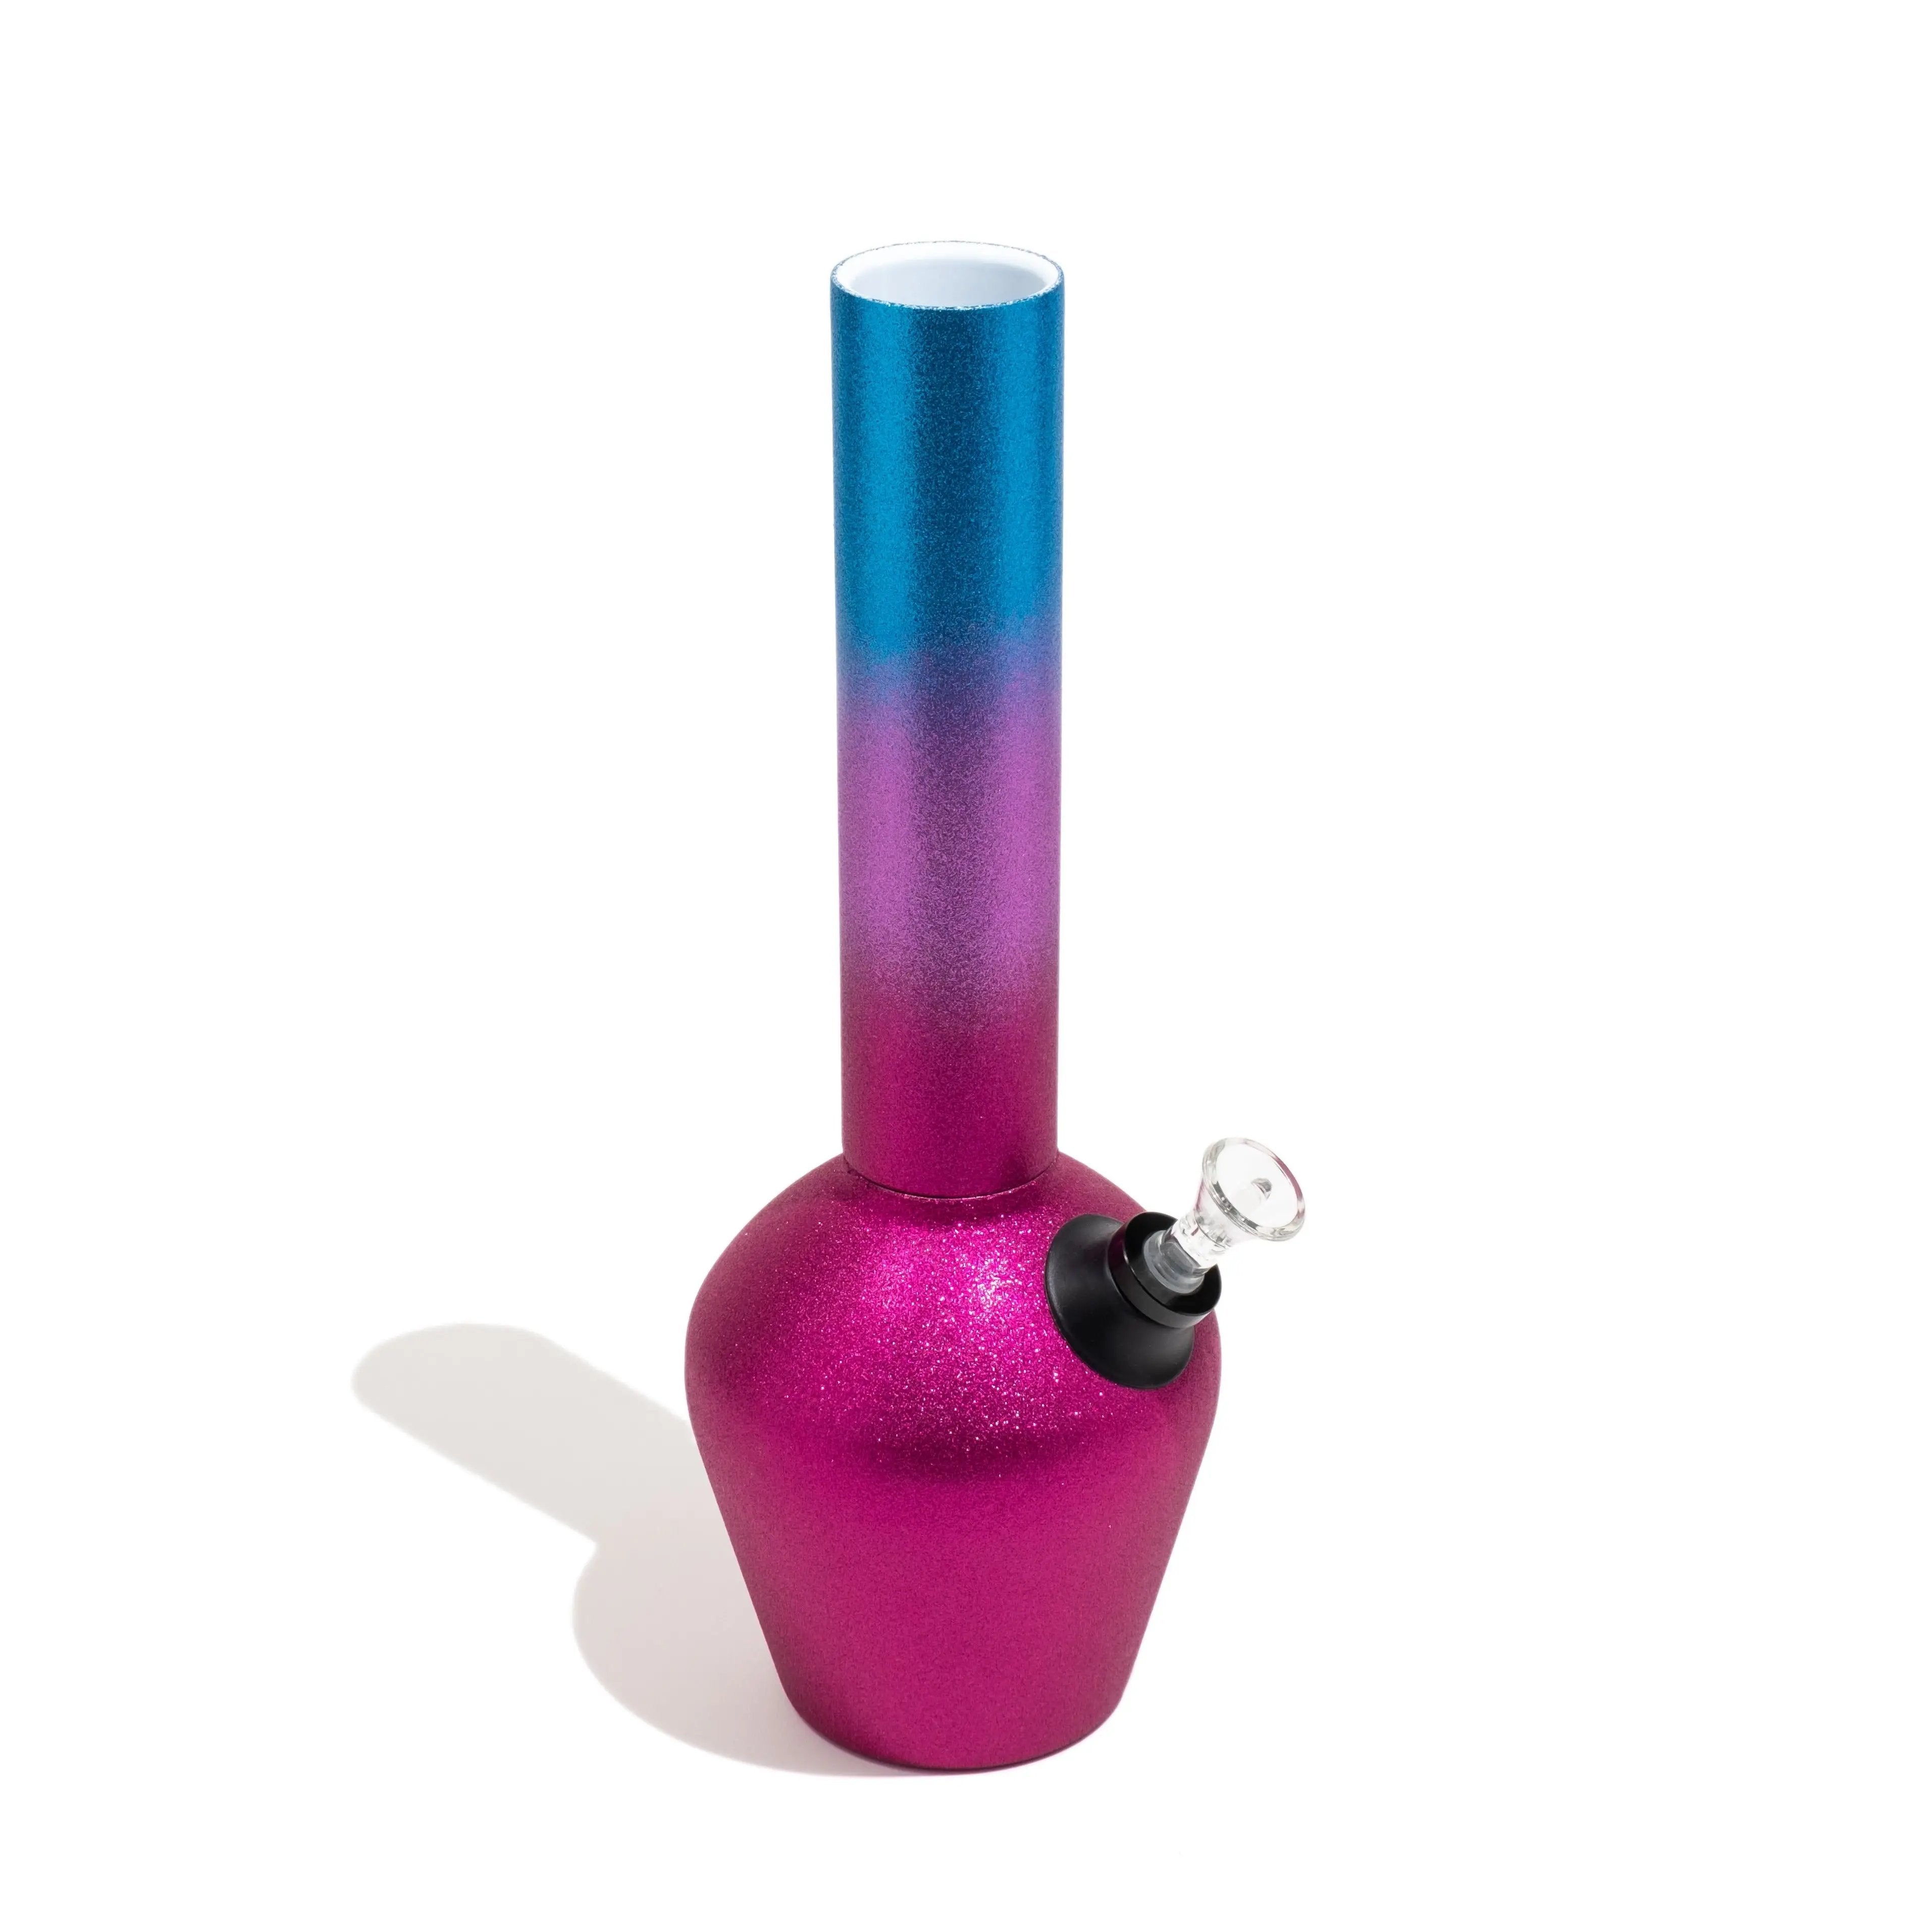 Chill - Limited Edition - Cotton Candy Glitterbomb by Chill Steel Pipes